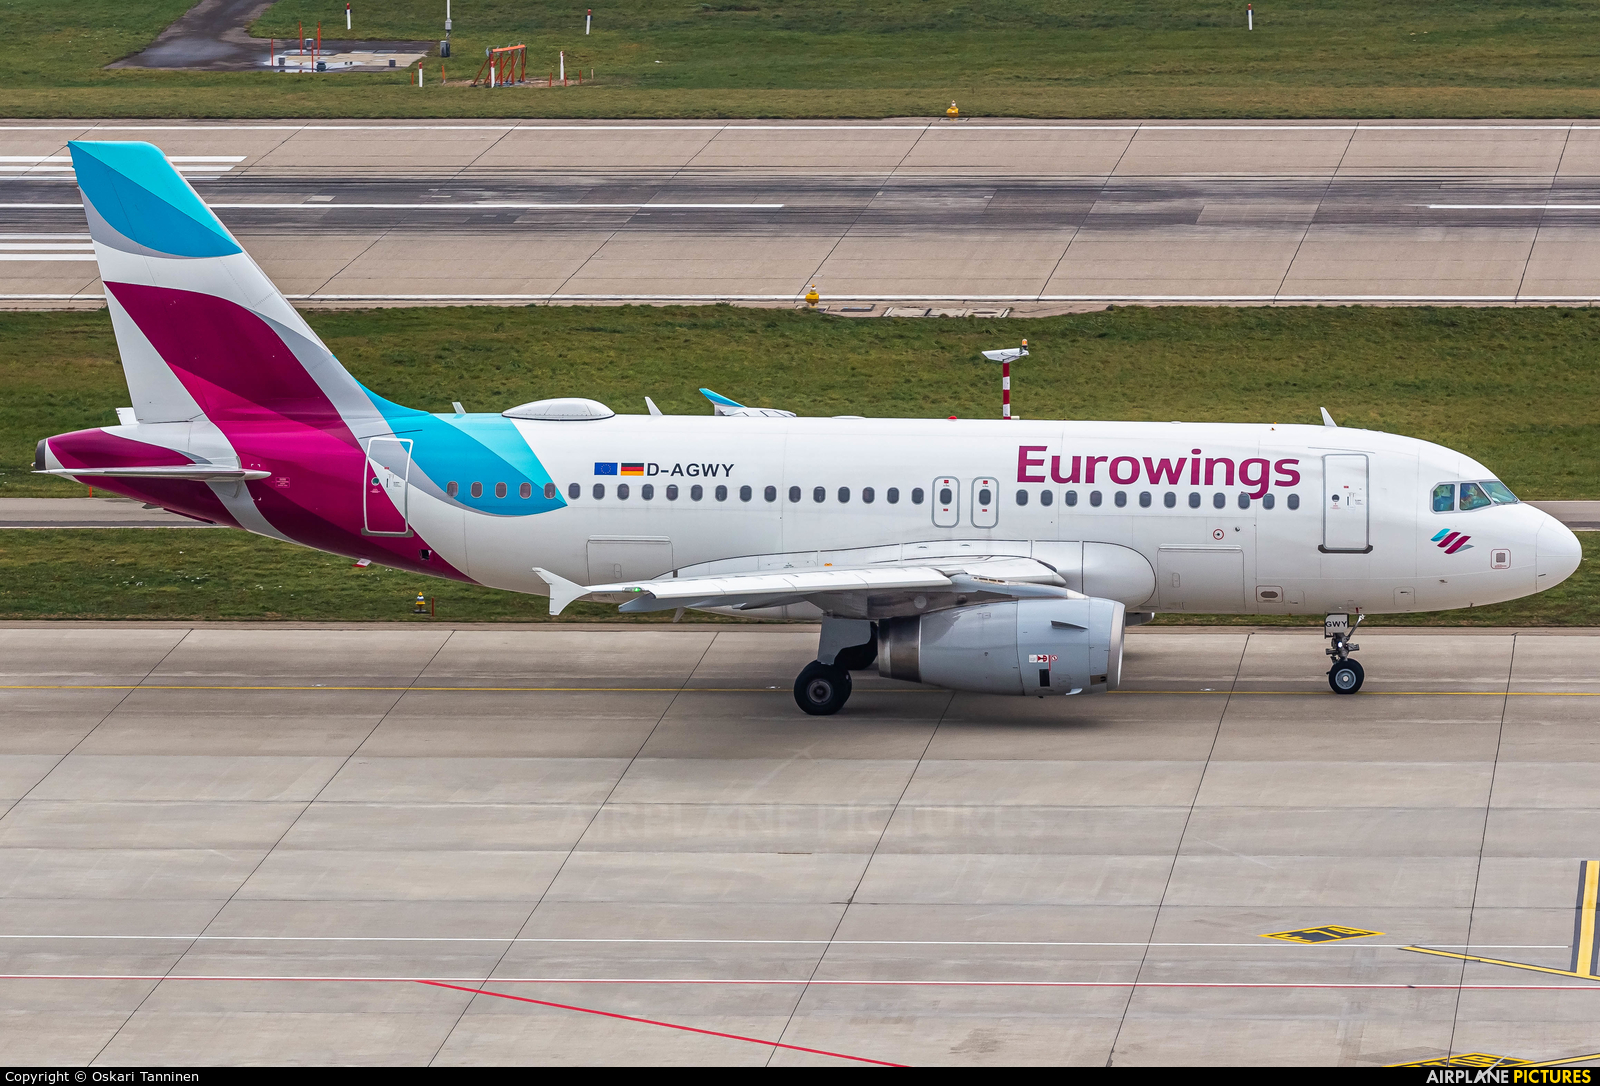 Eurowings D-AGWY aircraft at Zurich